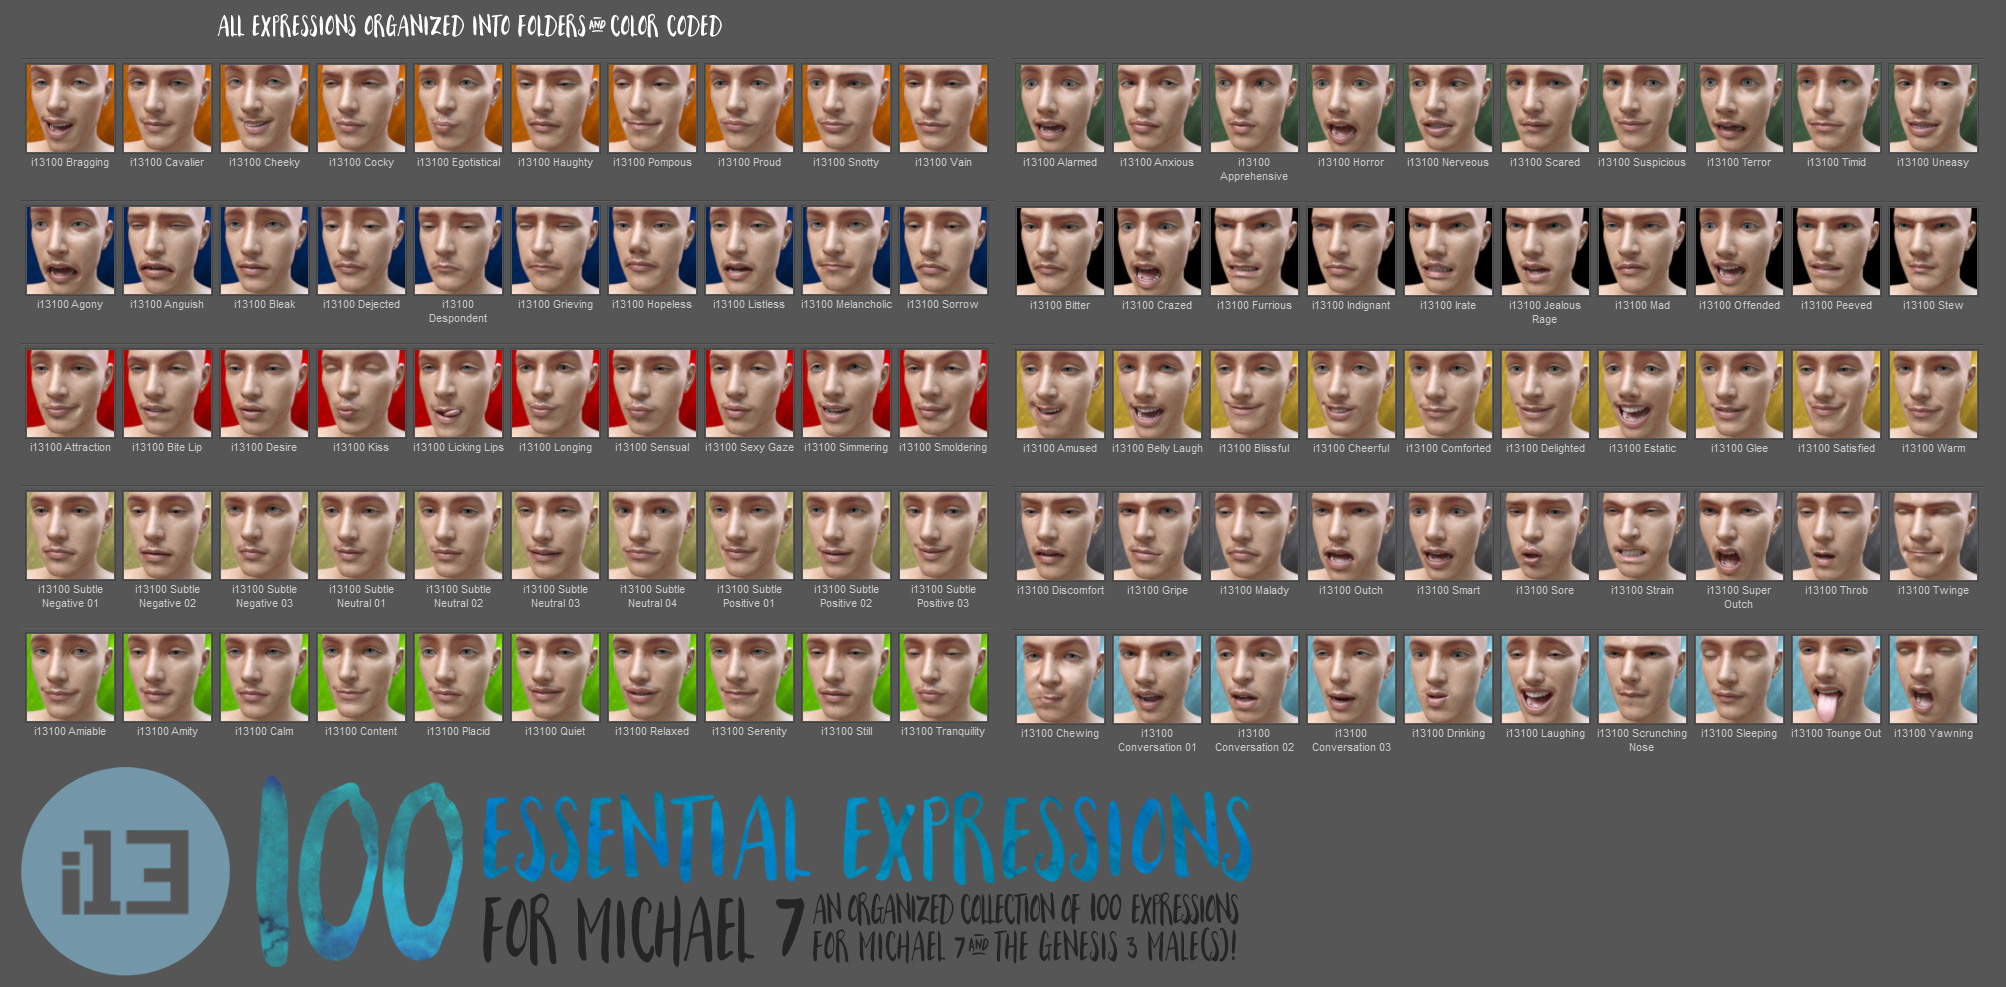 i13 100 Essential Expressions for Michael 7 by: ironman13, 3D Models by Daz 3D